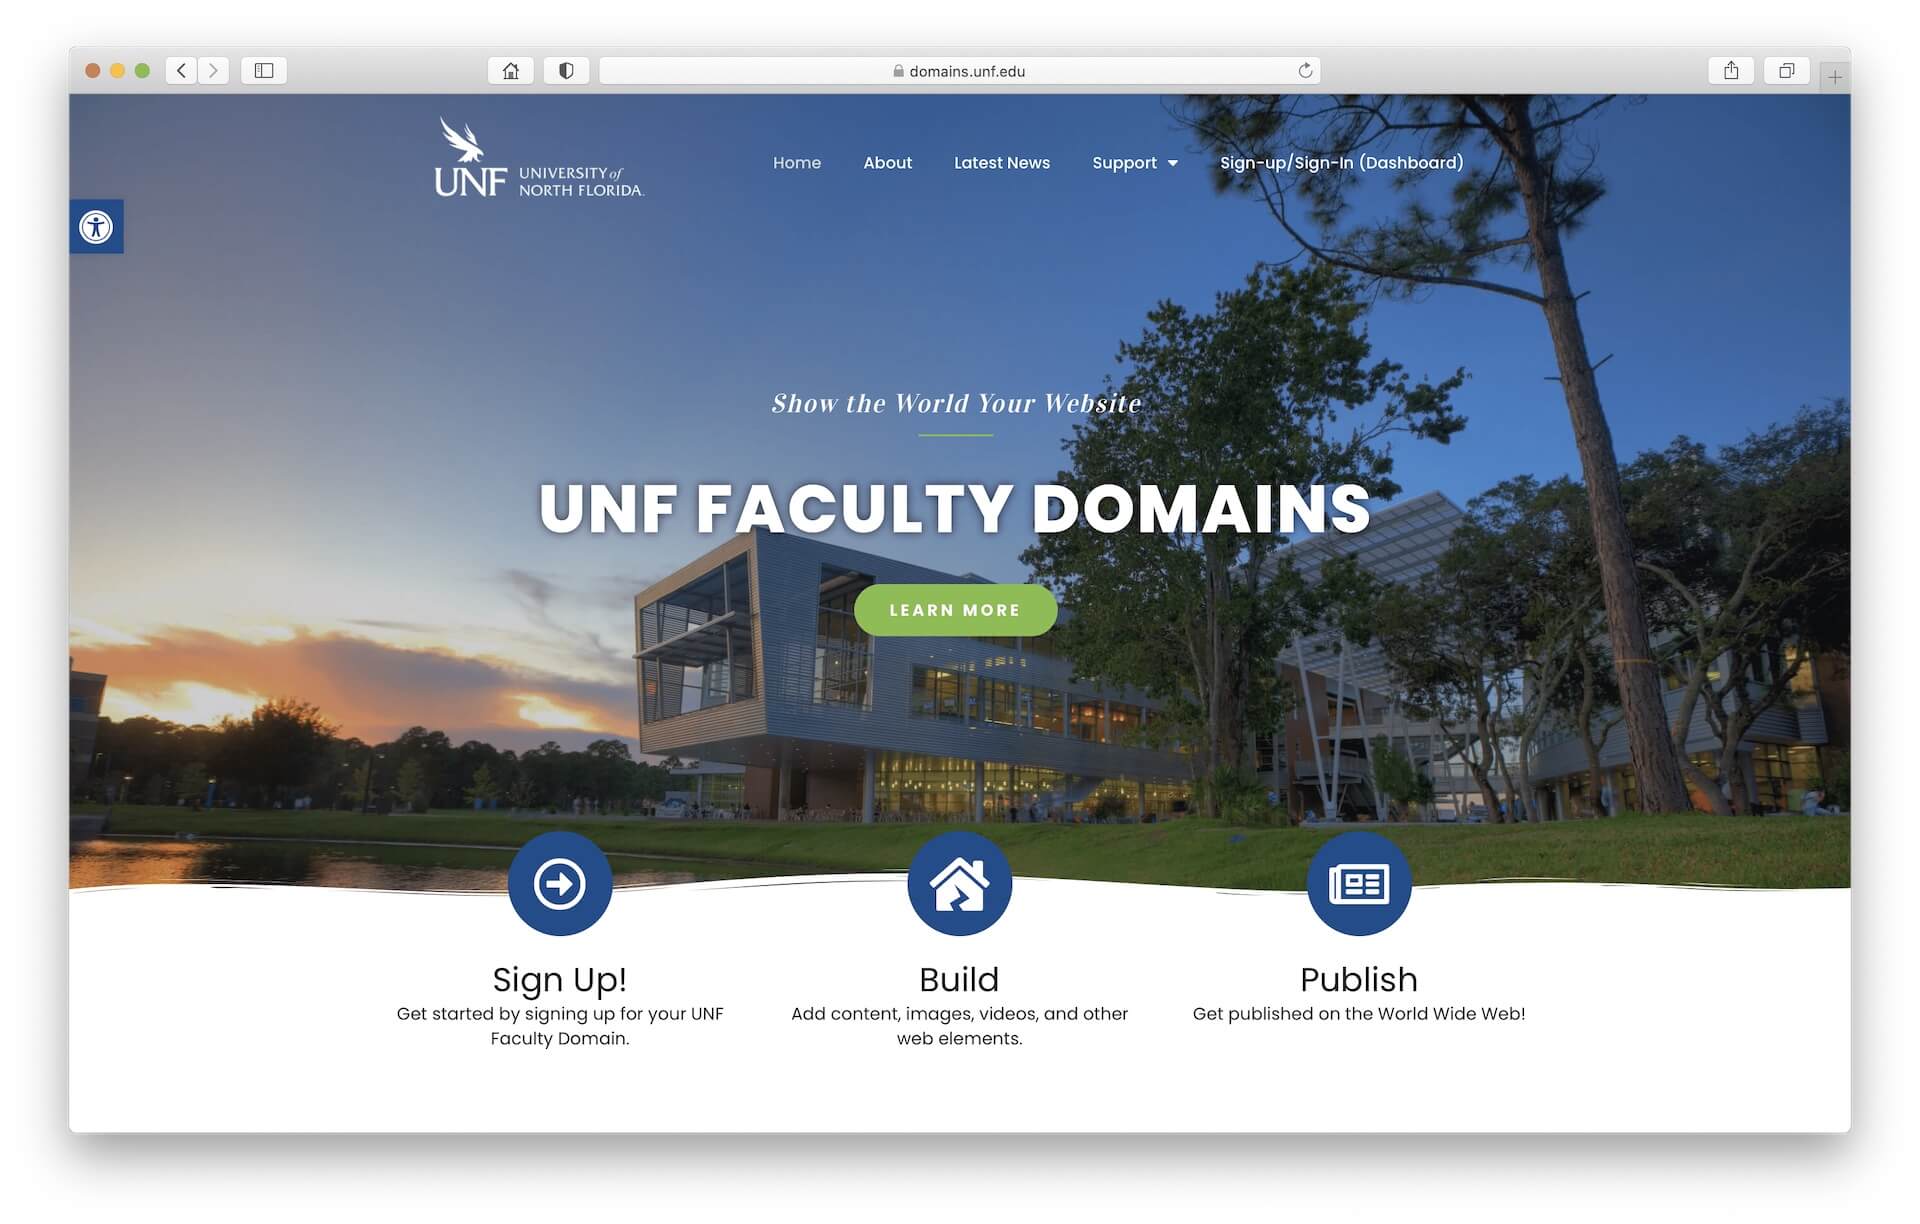 UNF Faculty Domains webpage screenshot